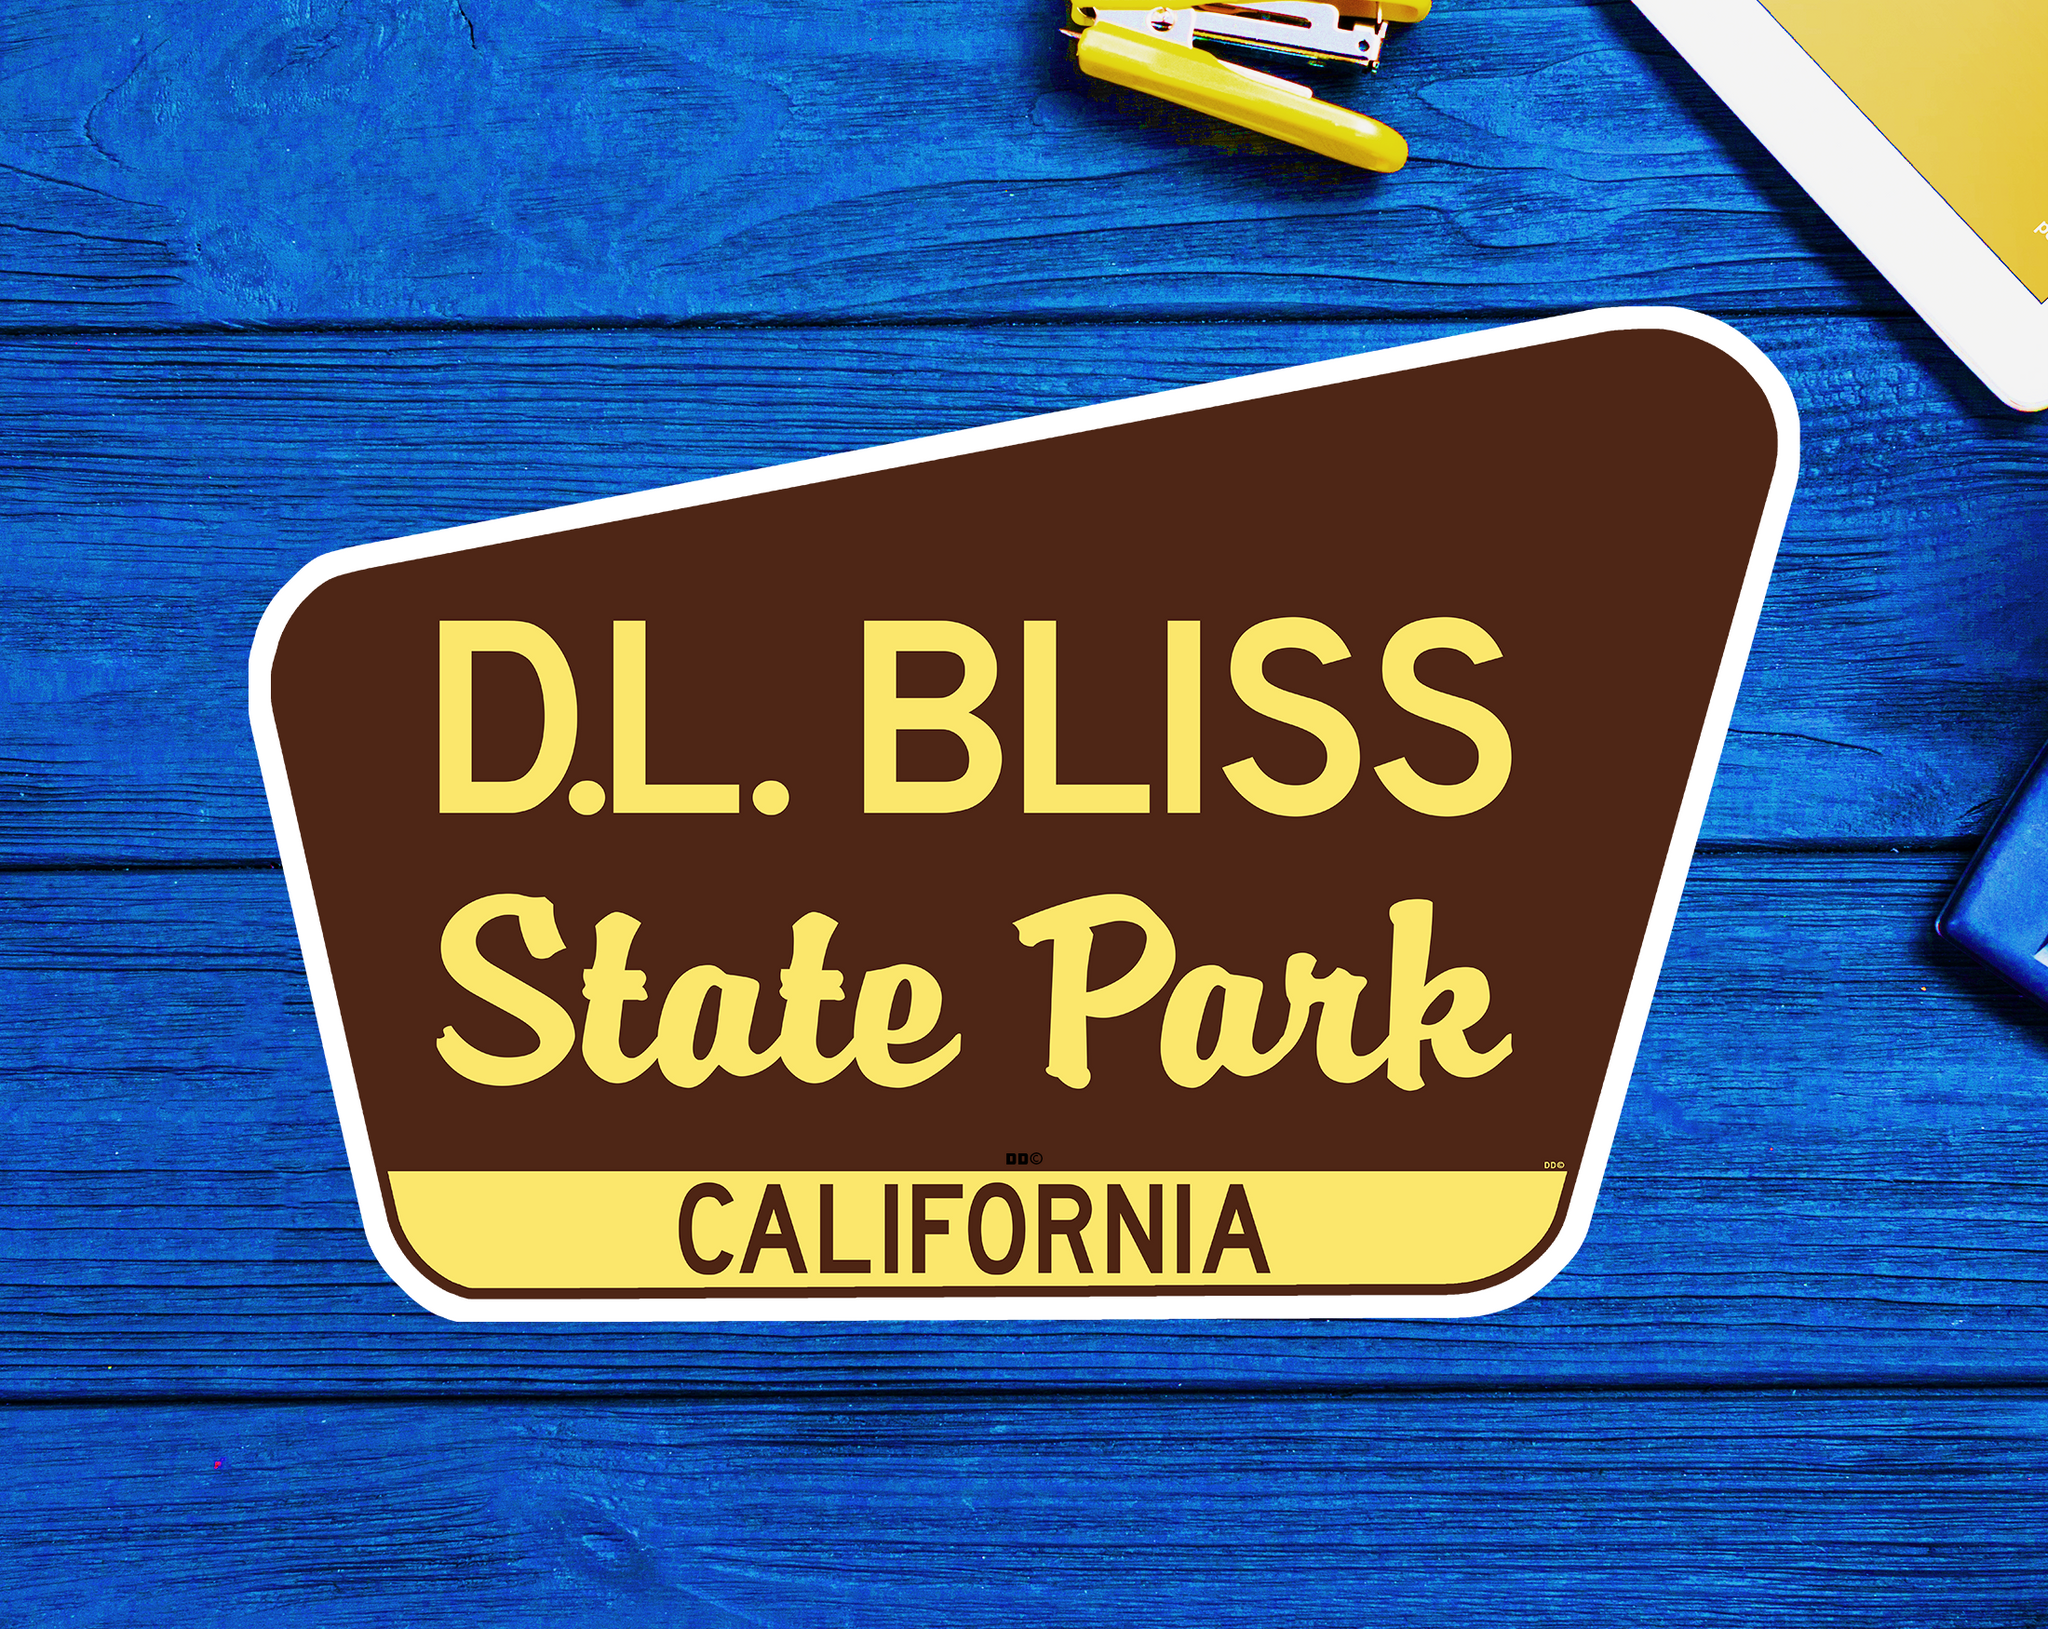 50 D.L. Bliss State Park California Decals